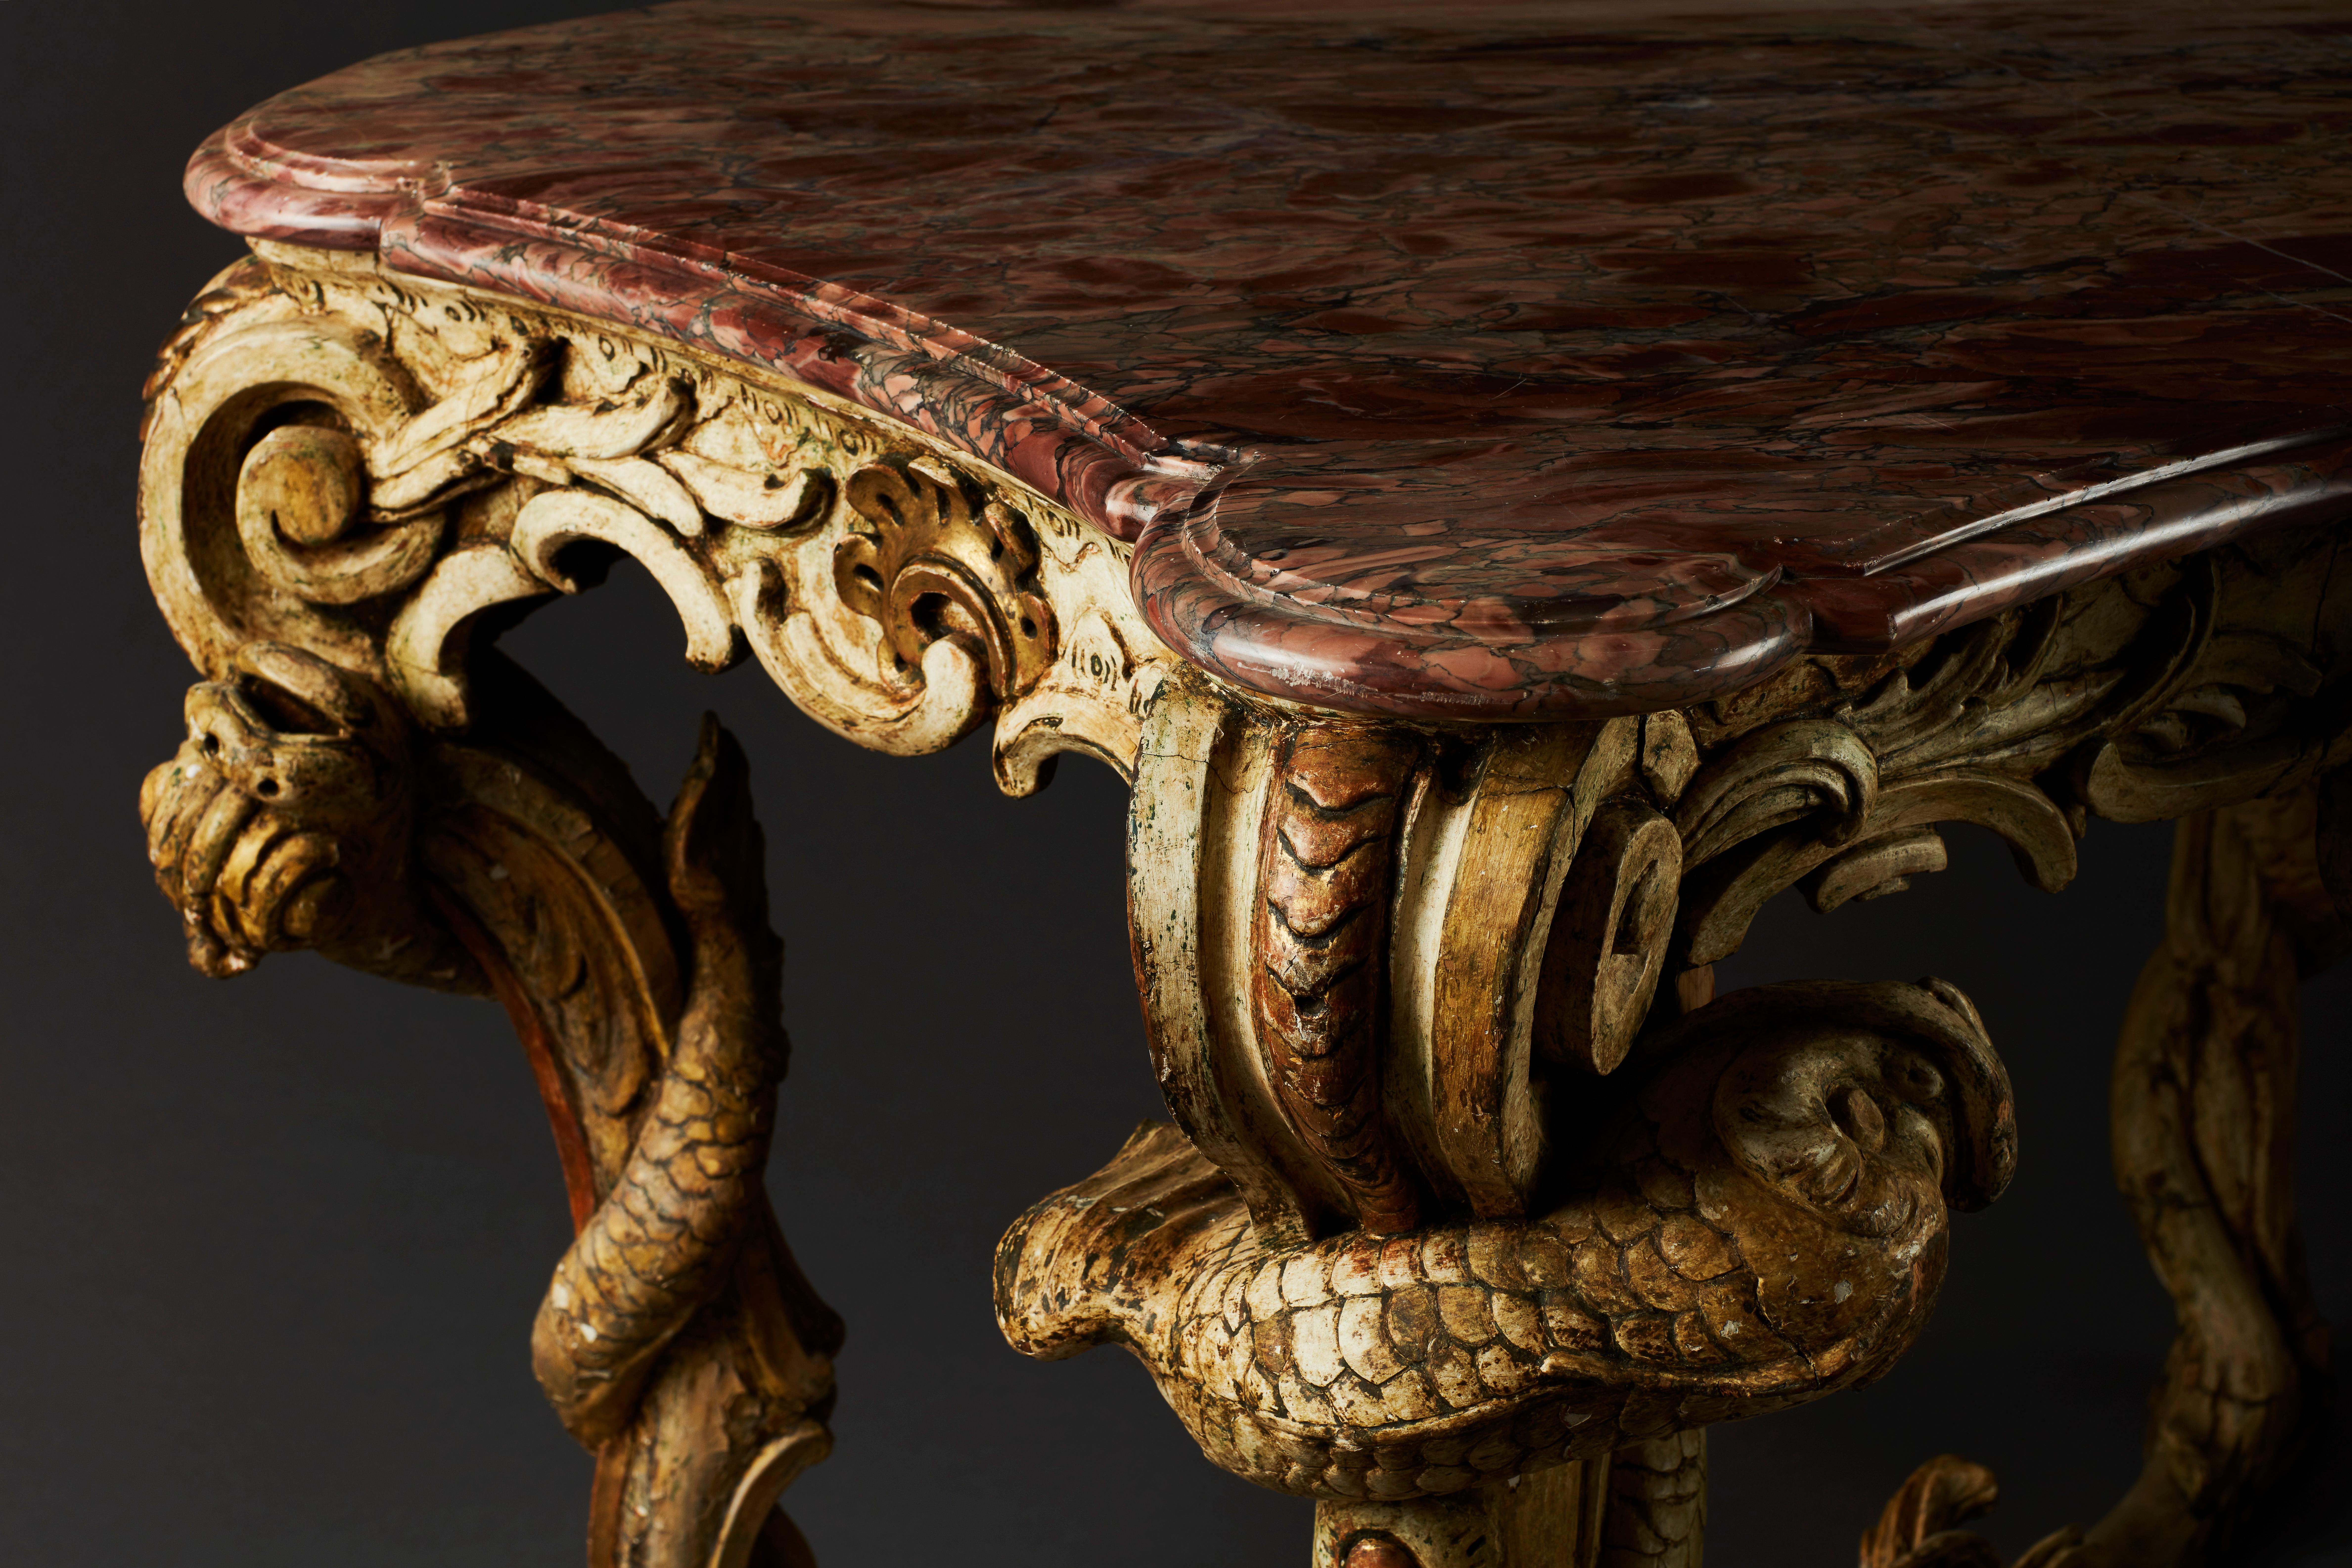 A very unusual and superb Rococo console table from the mid-18th century. On four carved legs with an X-shaped stretcher, overall with scrolls and dolphin-like sea creatures. This extravagant console table recalls features of fantastic 18th century